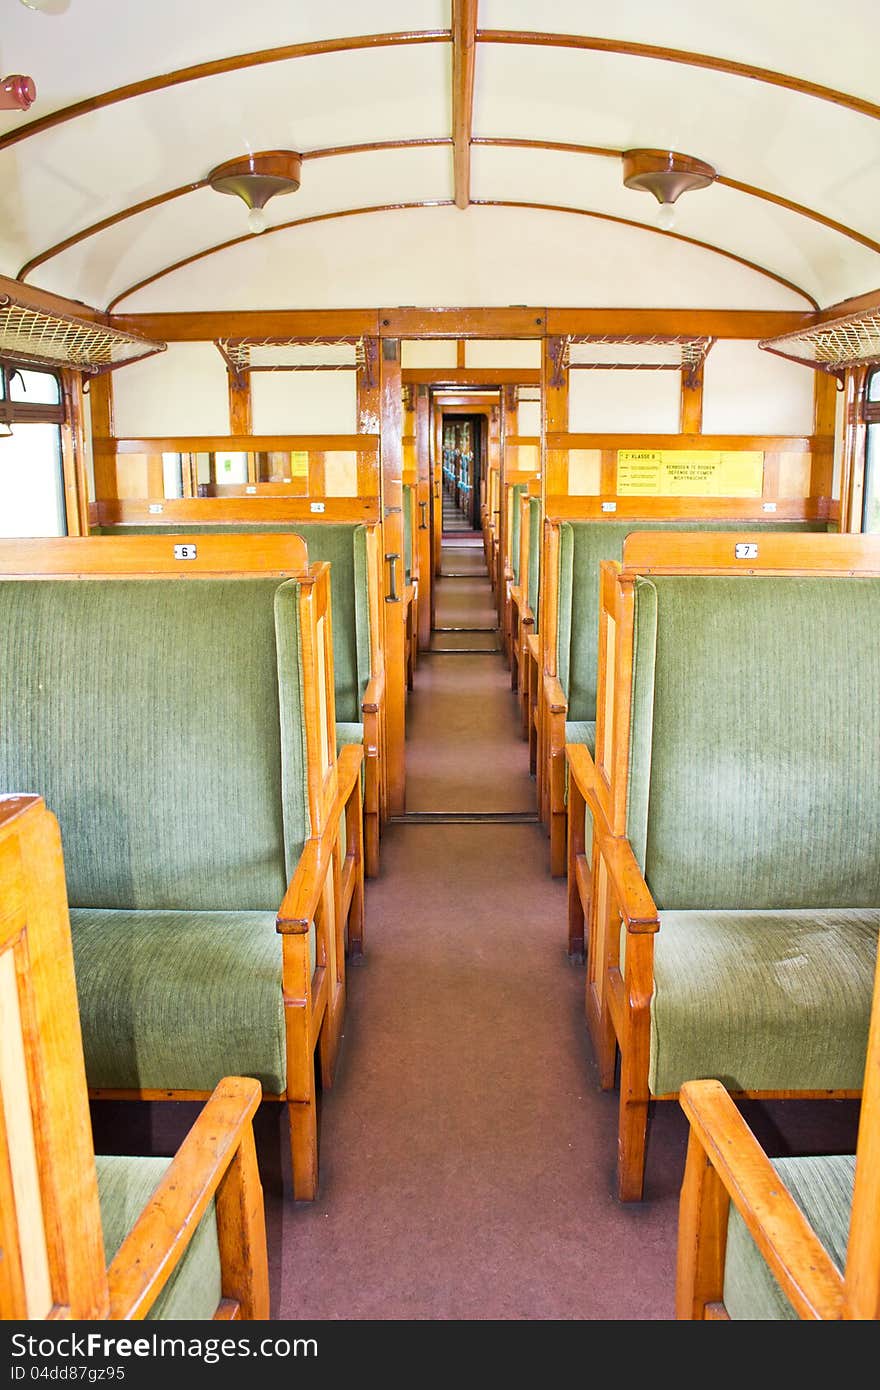 Old Train 2nd Class Wagon Cabin for Travelers, Zeeland, Netherlands. Old Train 2nd Class Wagon Cabin for Travelers, Zeeland, Netherlands